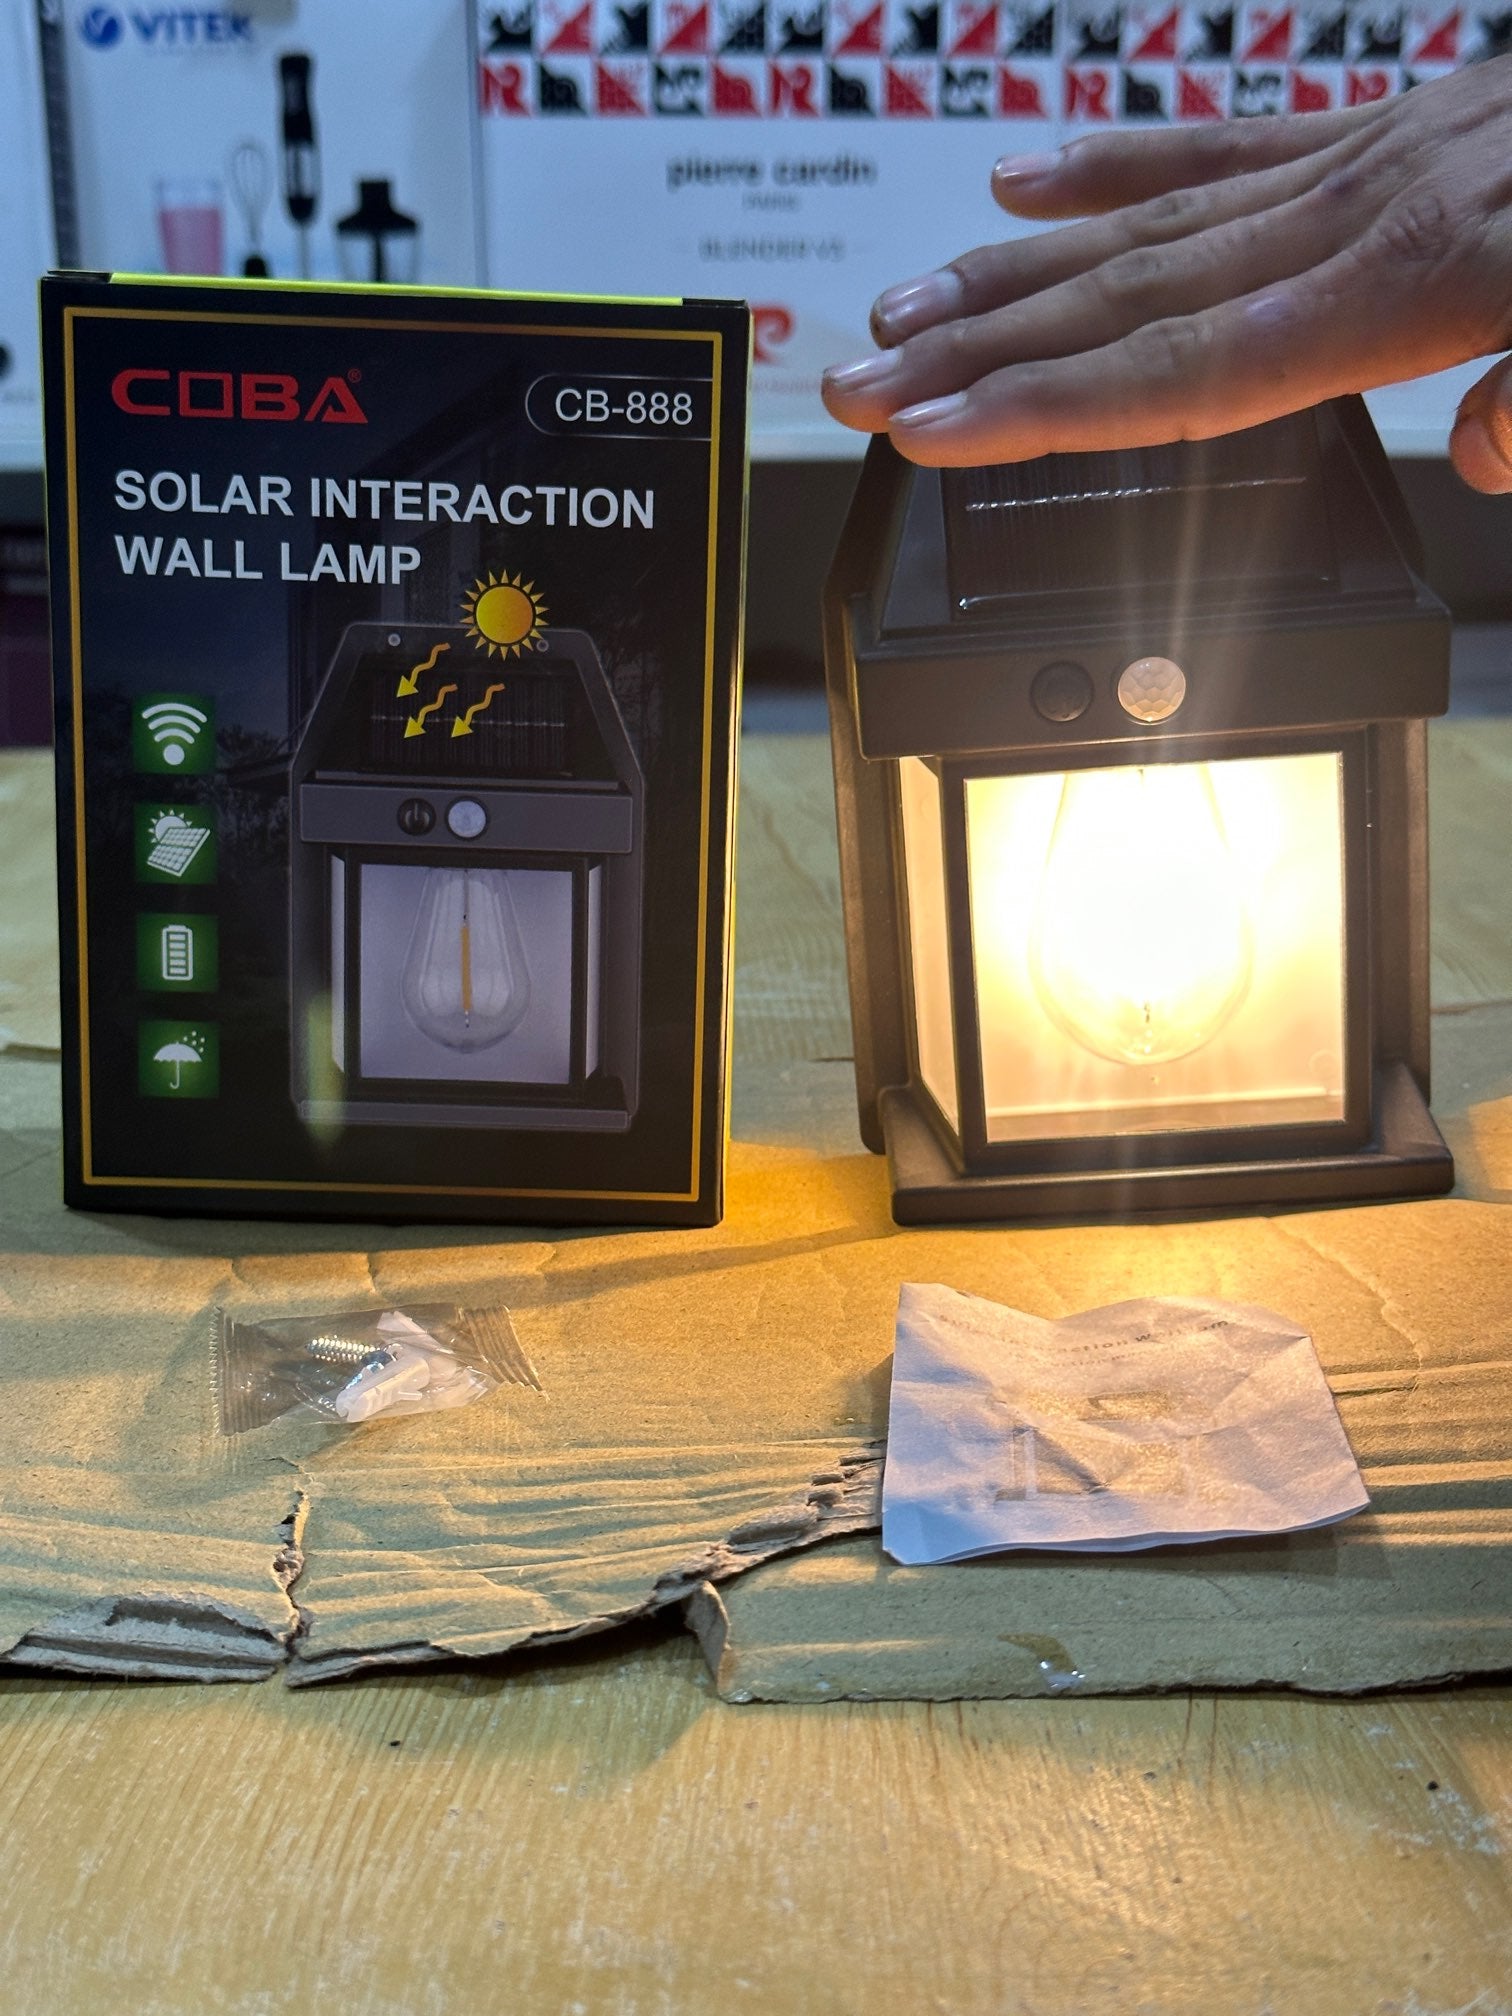 Lot imported COBA Solar Interaction Wall Lamp